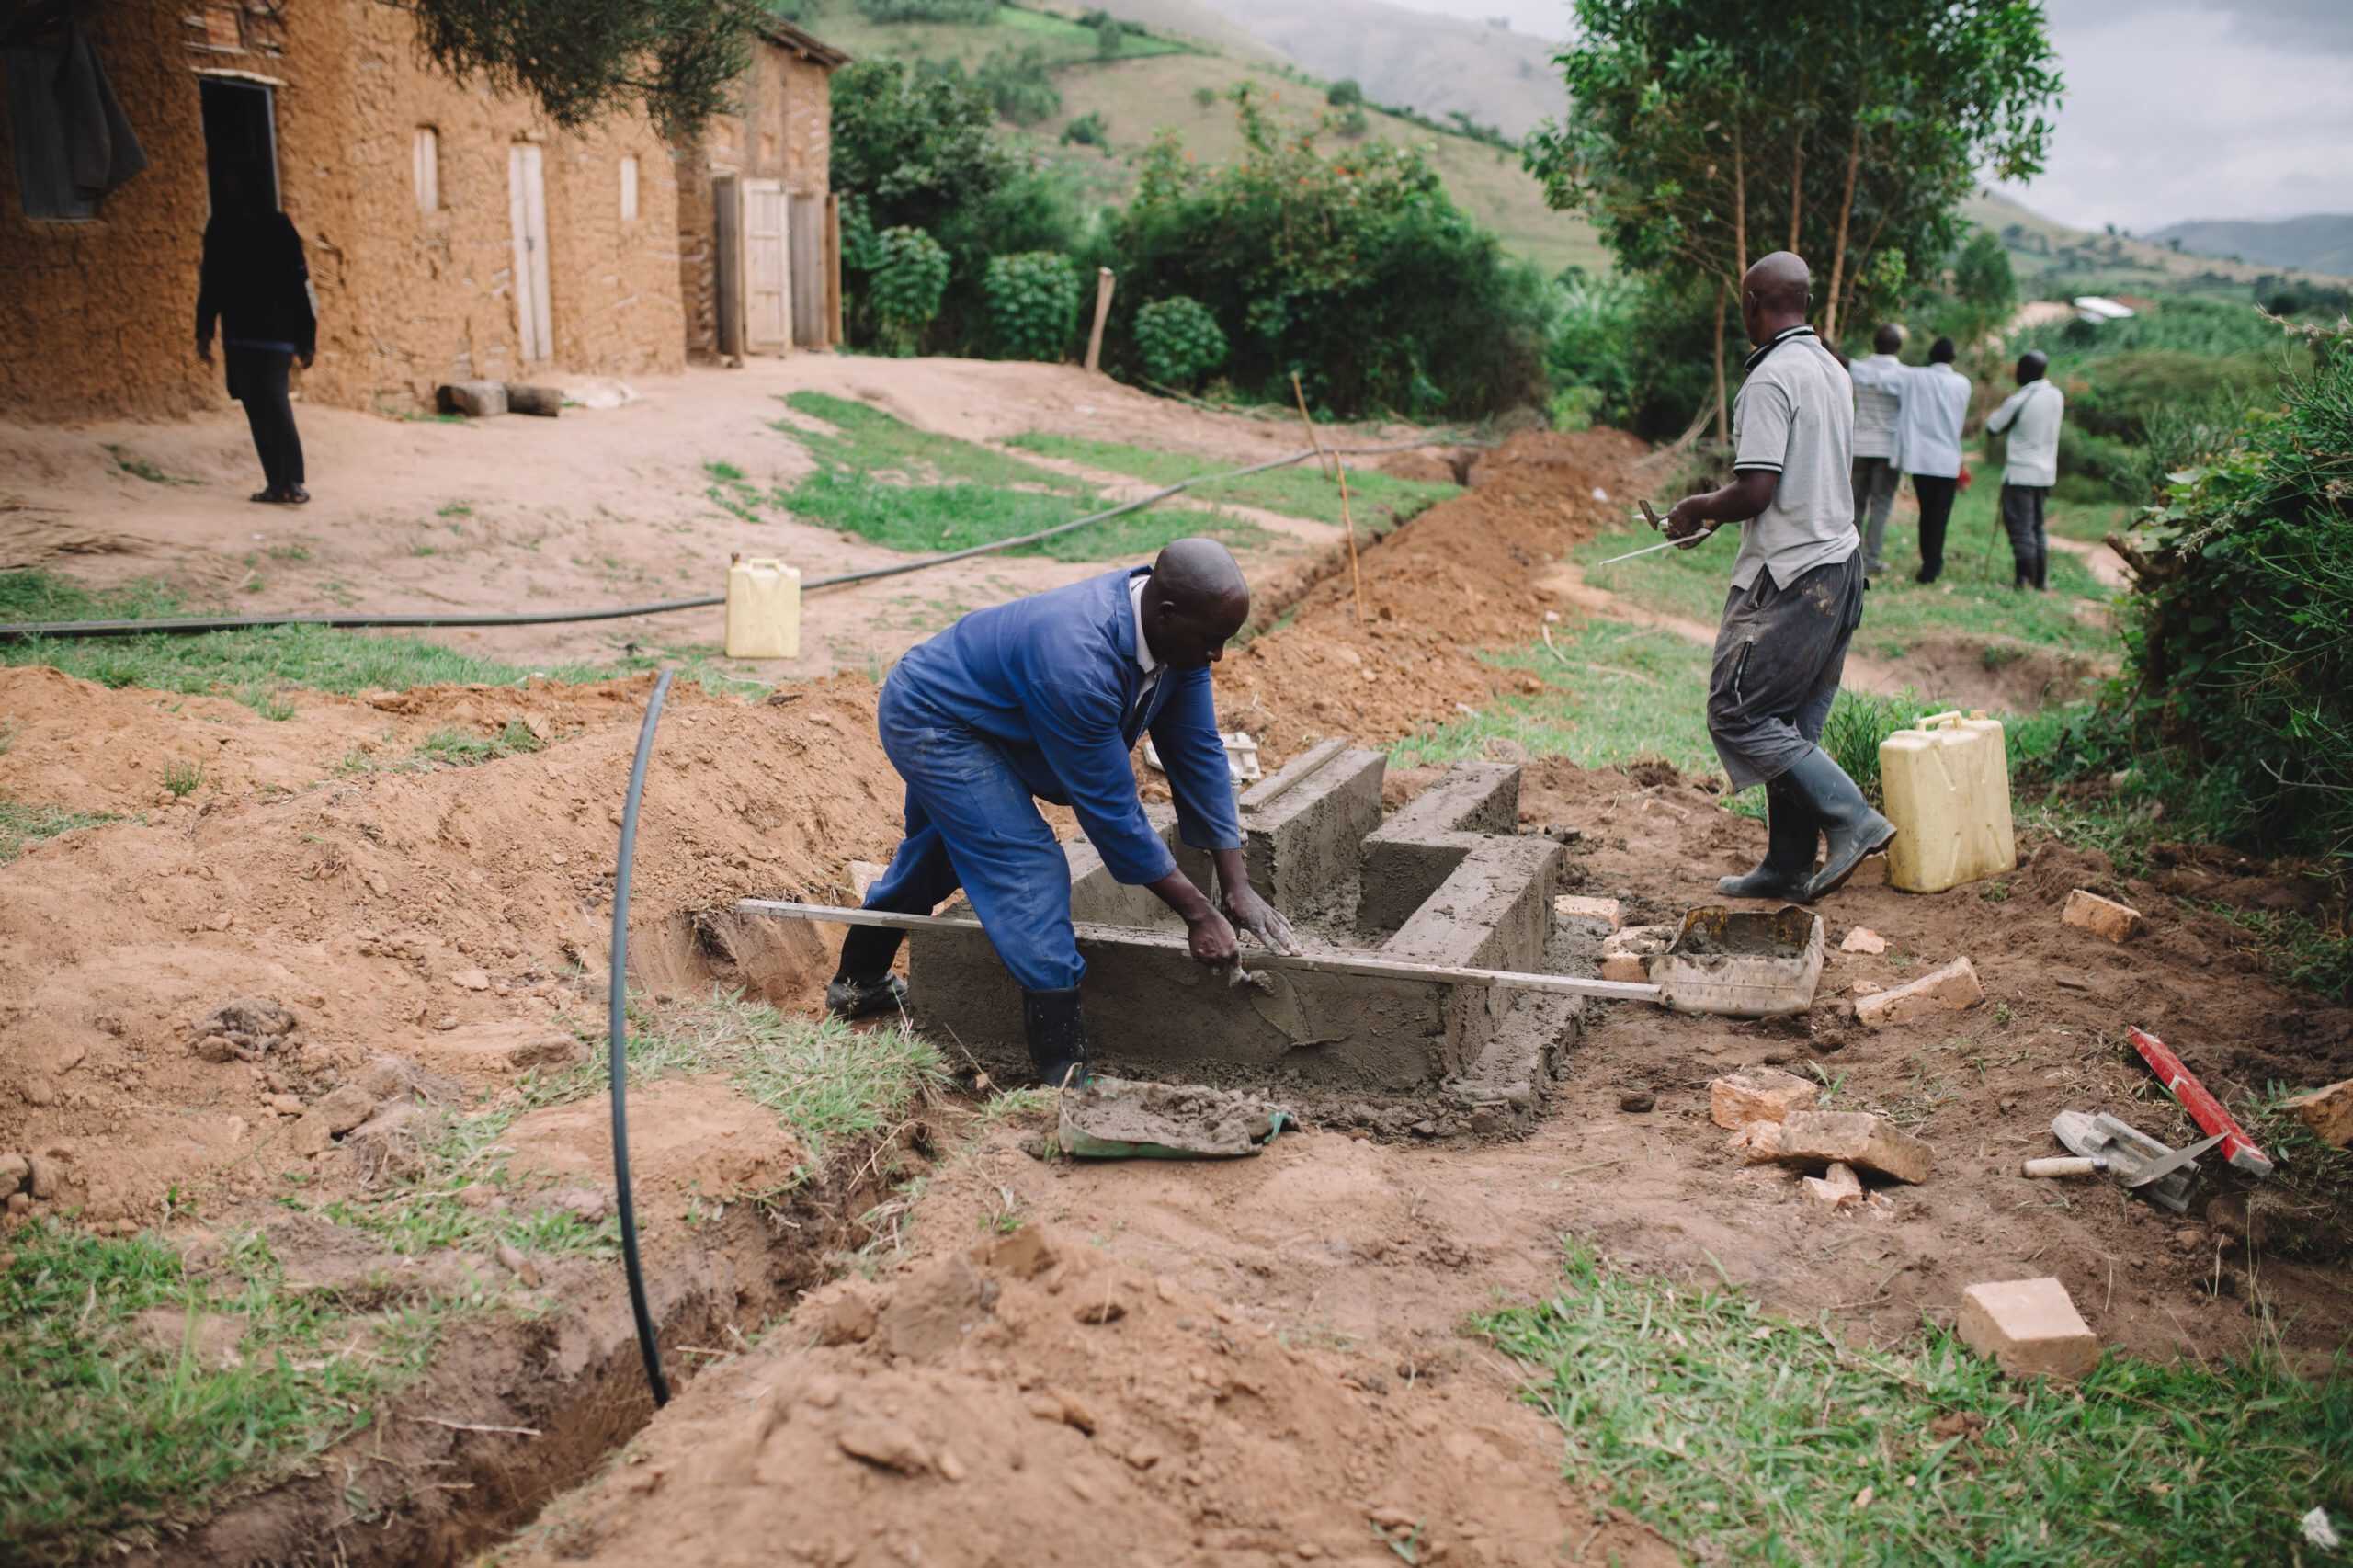 Ugandan labourers constructing a water tap stand